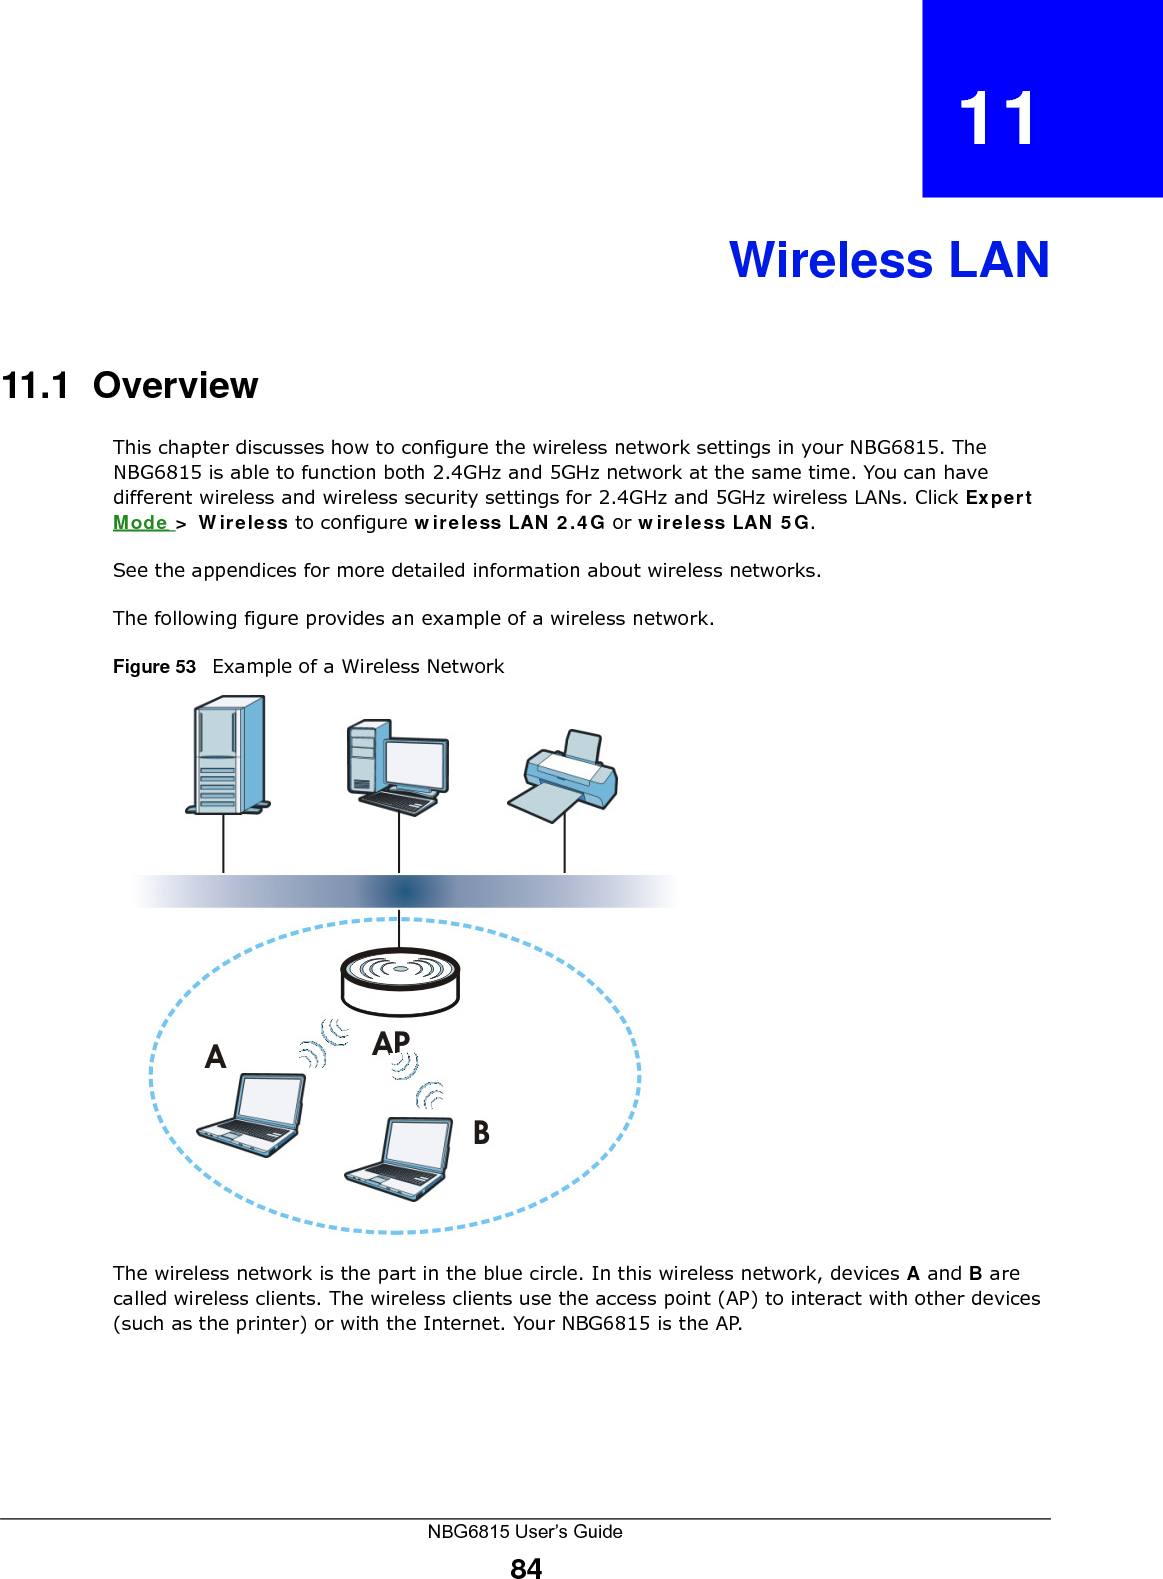 NBG6815 User’s Guide84CHAPTER   11Wireless LAN11.1  OverviewThis chapter discusses how to configure the wireless network settings in your NBG6815. The NBG6815 is able to function both 2.4GHz and 5GHz network at the same time. You can have different wireless and wireless security settings for 2.4GHz and 5GHz wireless LANs. Click Expert Mode &gt; Wireless to configure wireless LAN 2.4G or wireless LAN 5G.See the appendices for more detailed information about wireless networks.The following figure provides an example of a wireless network.Figure 53   Example of a Wireless NetworkThe wireless network is the part in the blue circle. In this wireless network, devices A and B are called wireless clients. The wireless clients use the access point (AP) to interact with other devices (such as the printer) or with the Internet. Your NBG6815 is the AP.